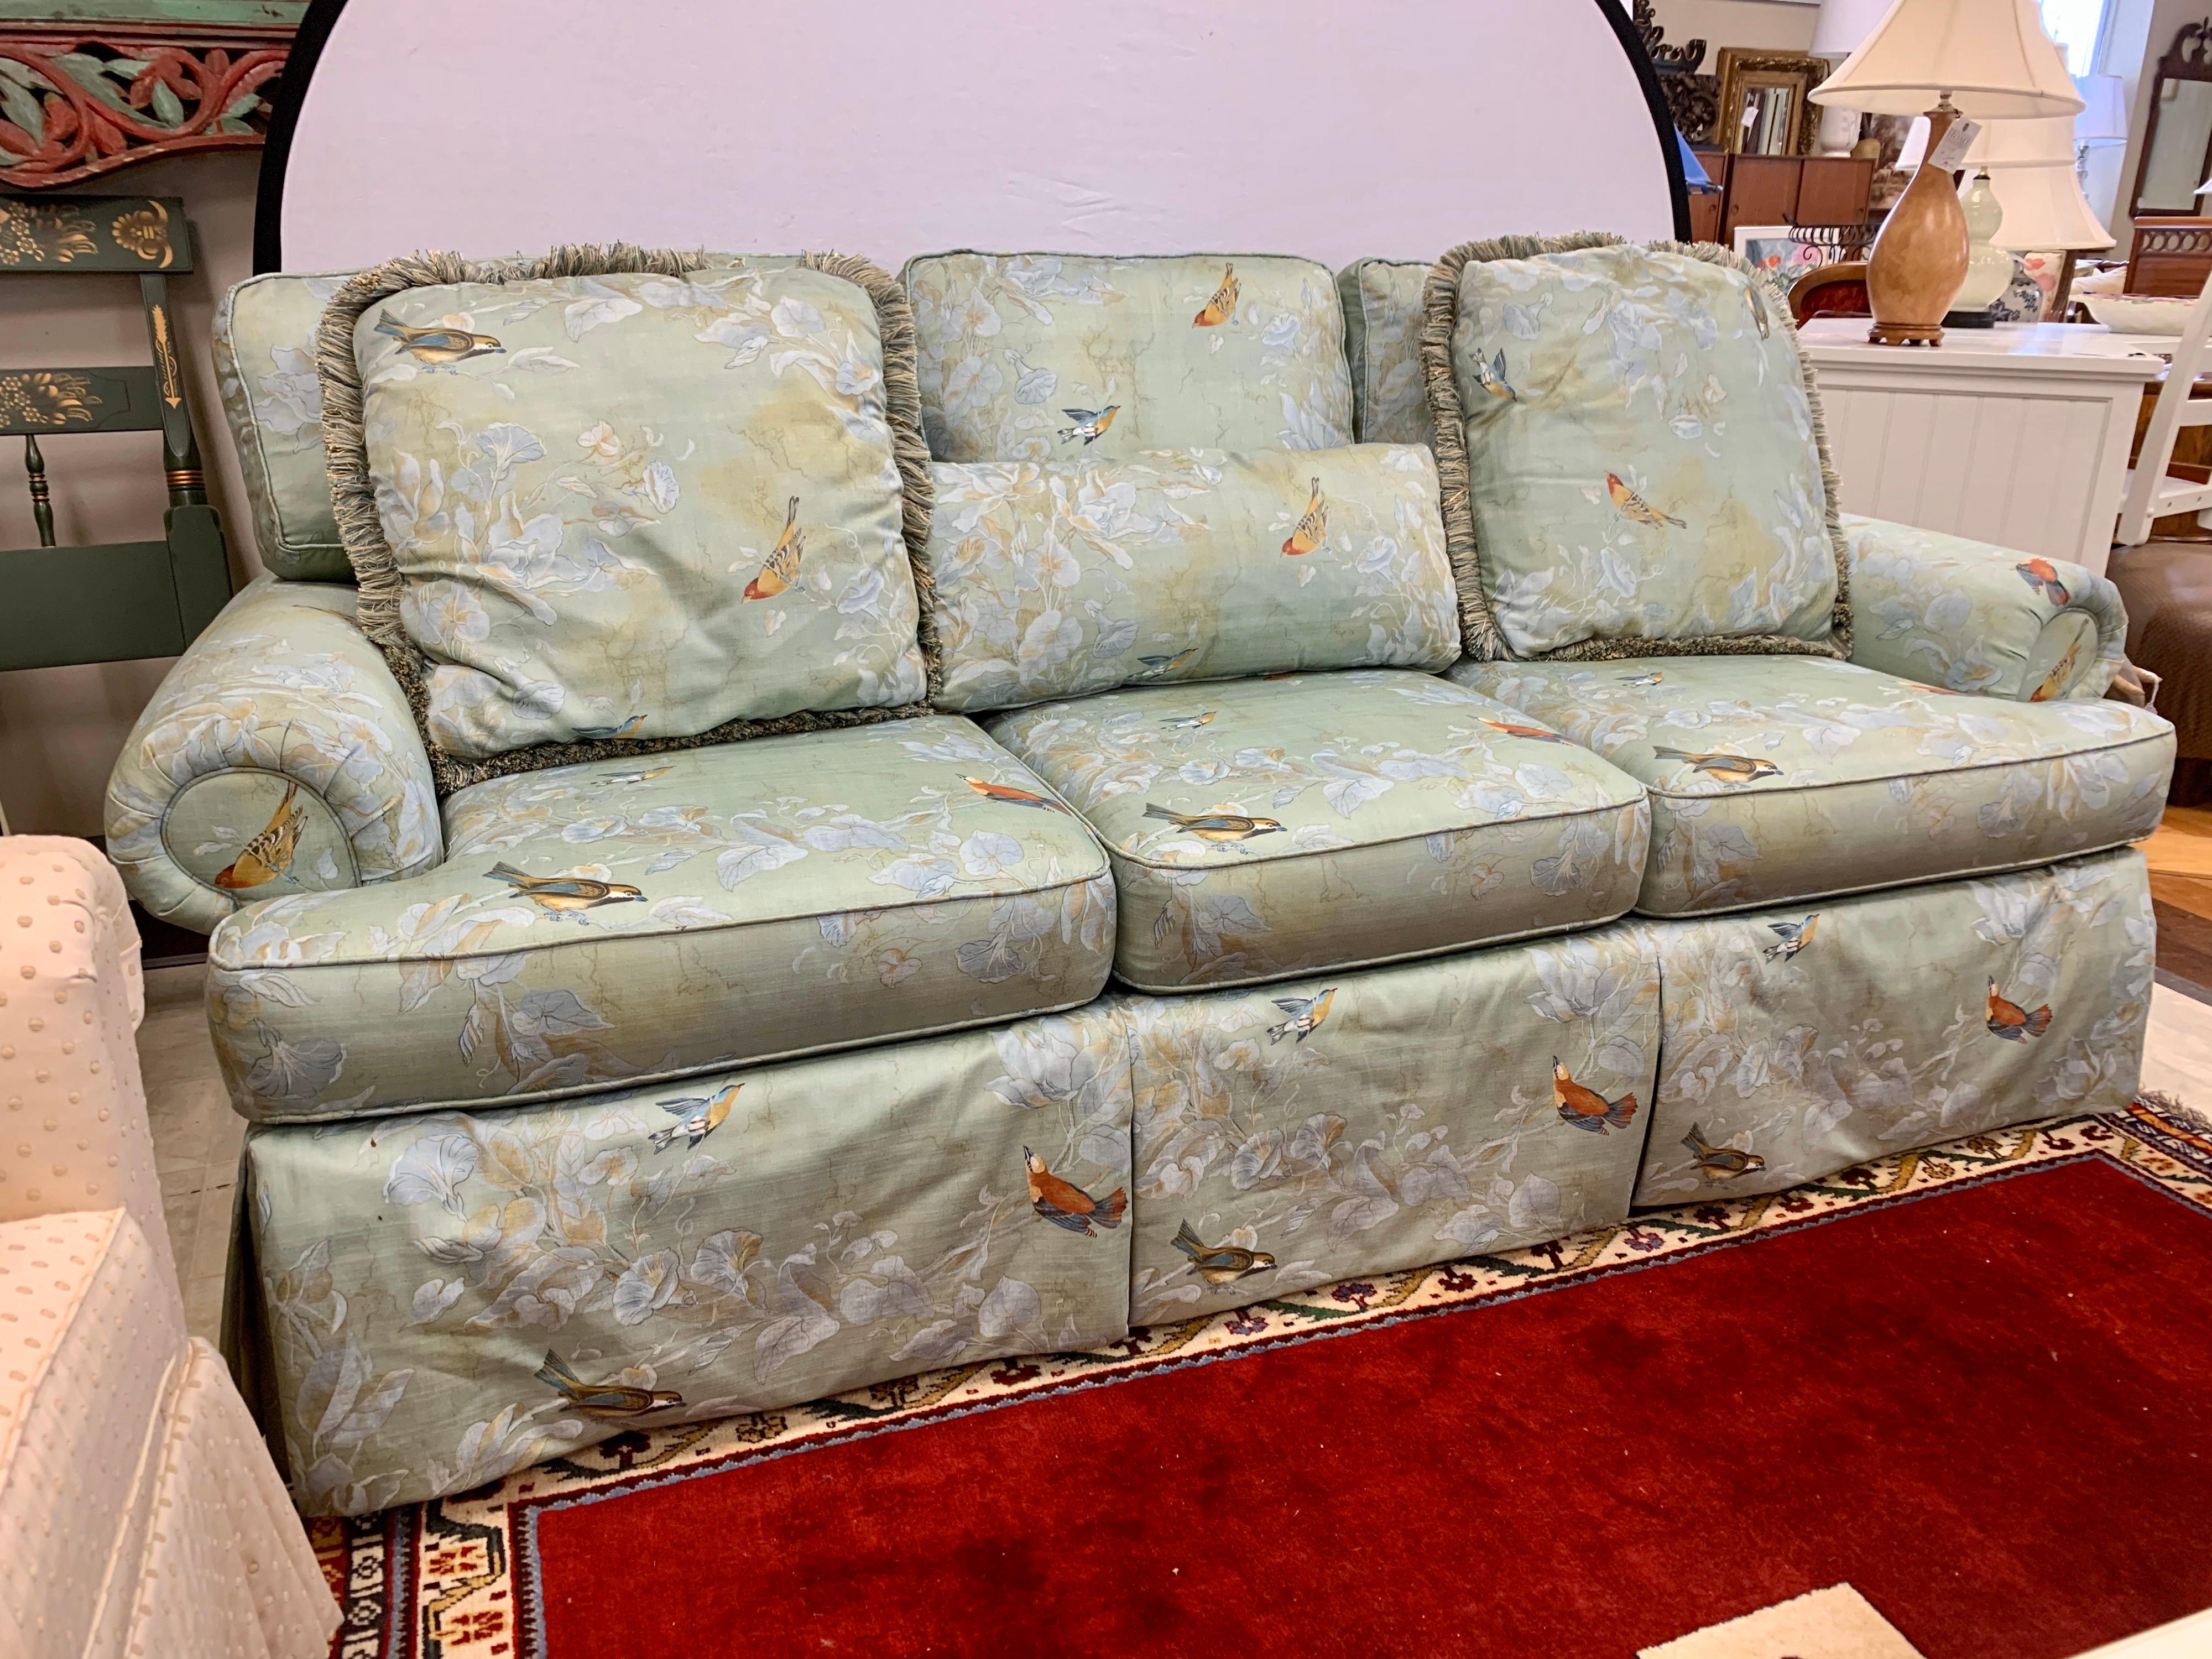 Beautiful and pristine seven foot upholstered sofa by Sherrill upholstered in a chinoiserie style chintz fabric in a robin’s egg blue with birds and flowers.
Made in North Carolina, USA and in great condition.